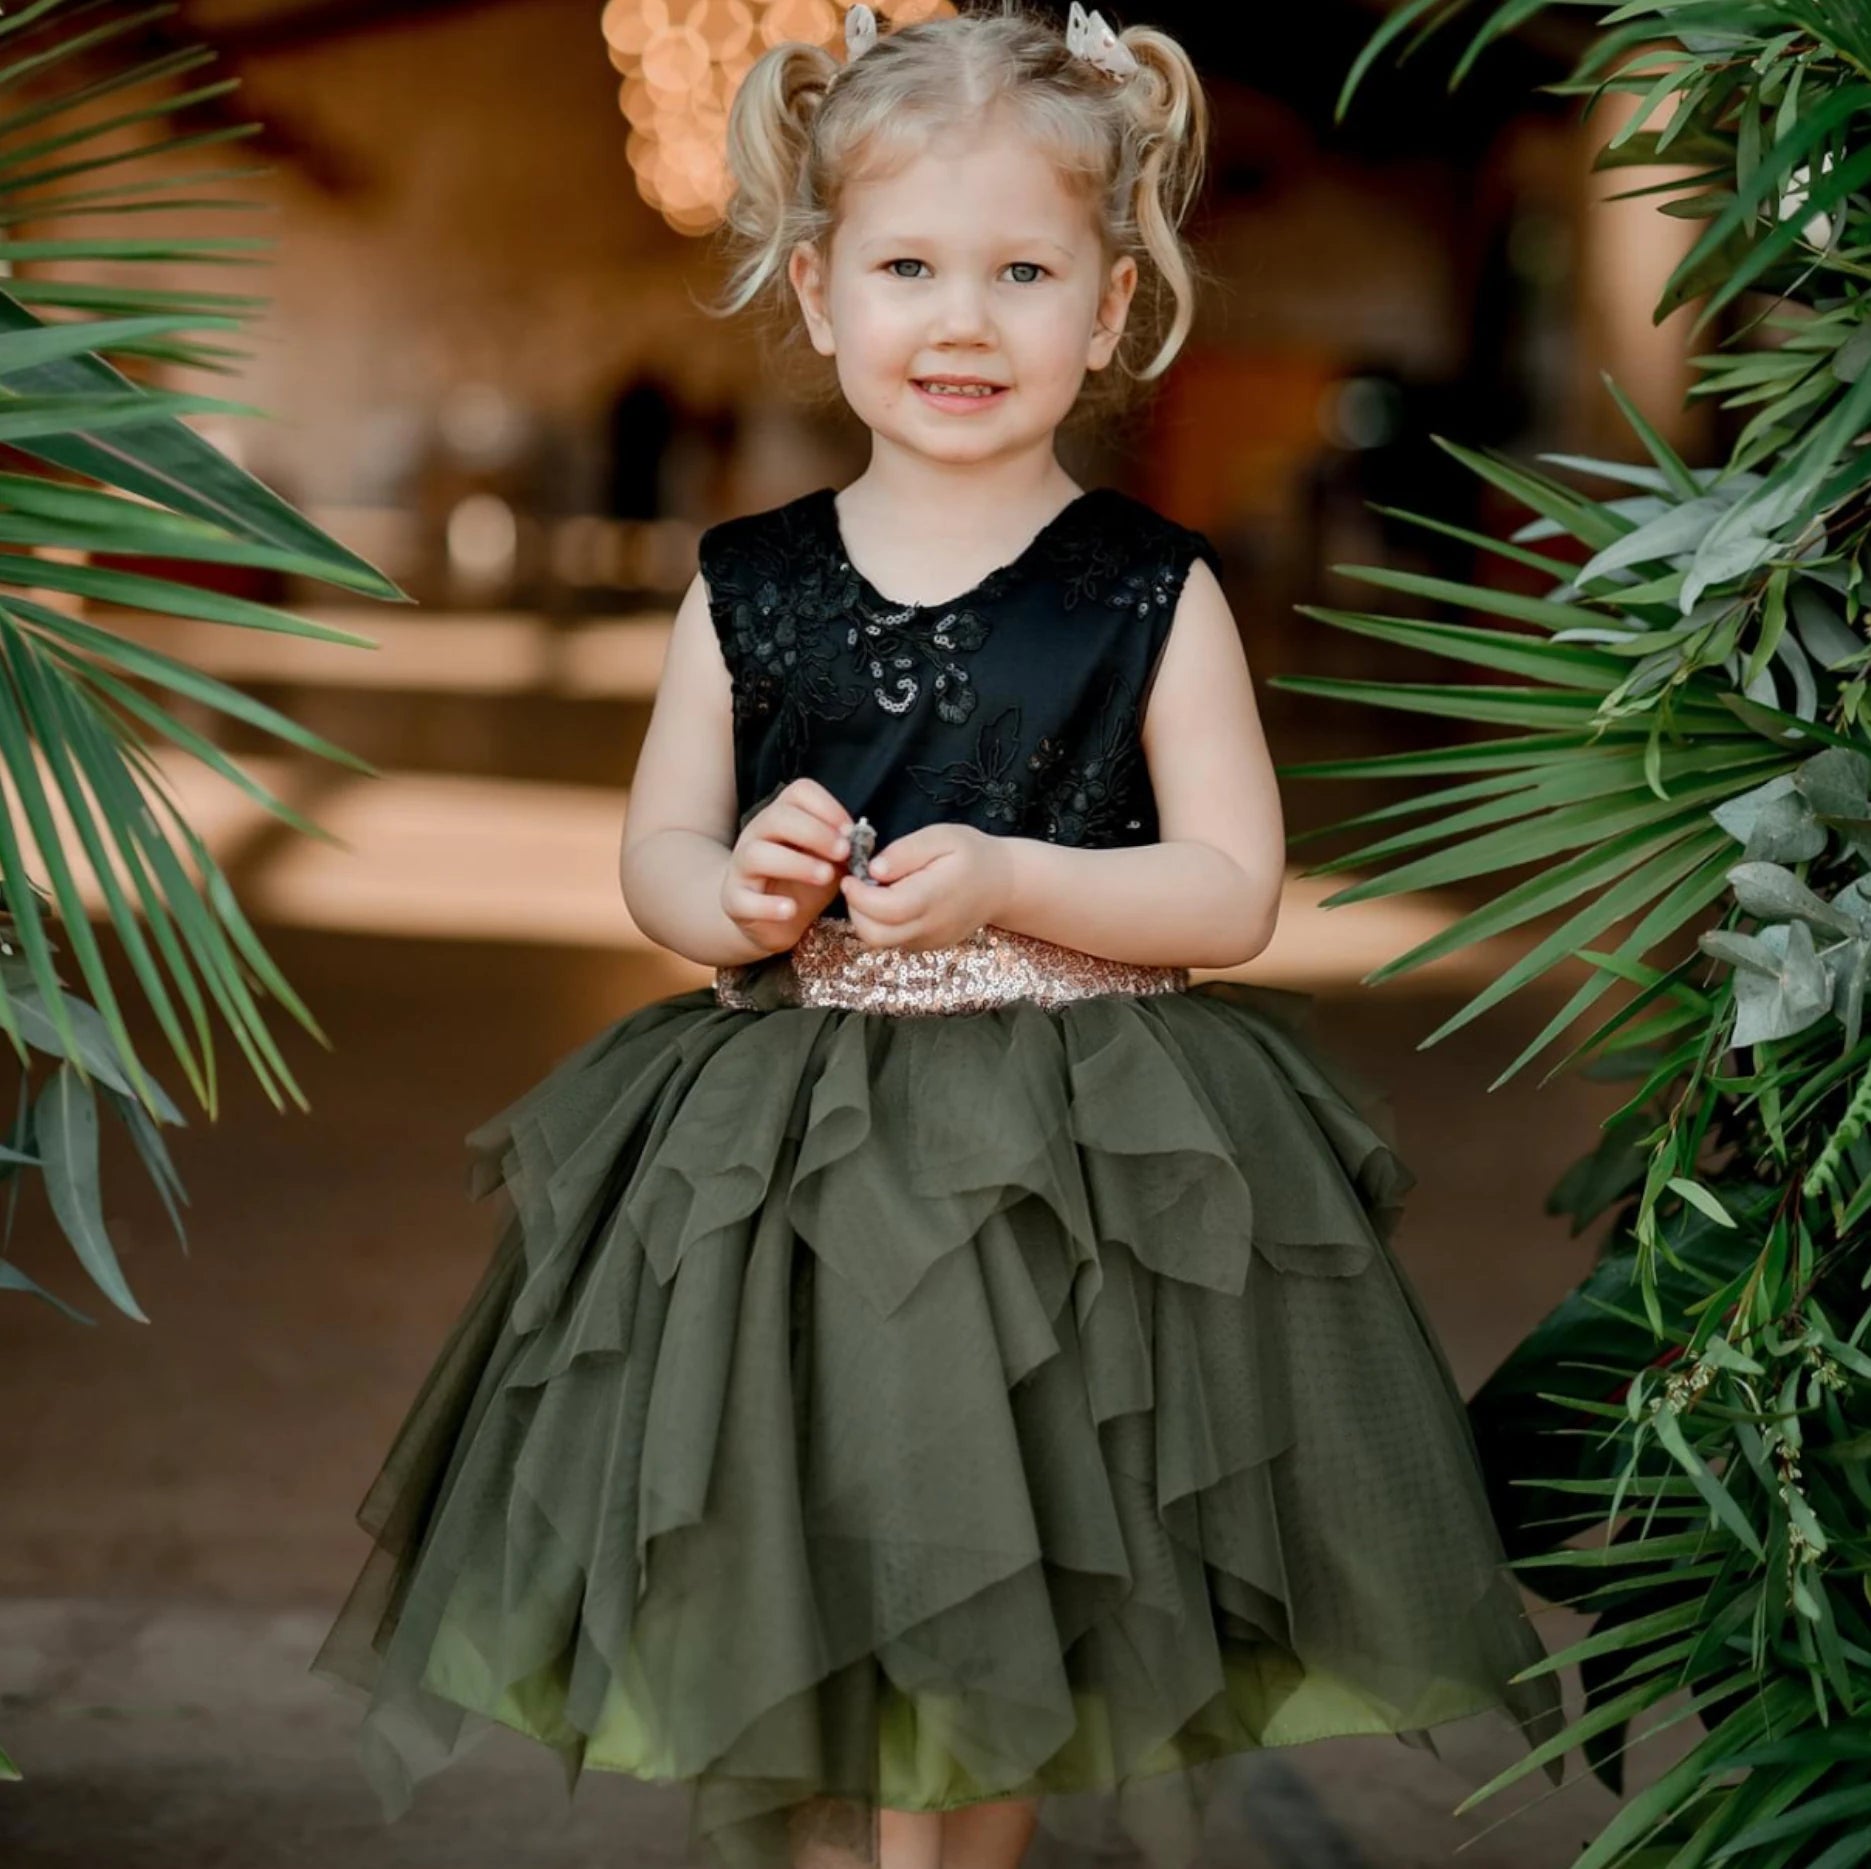 Amara olive green tulle and lace dress